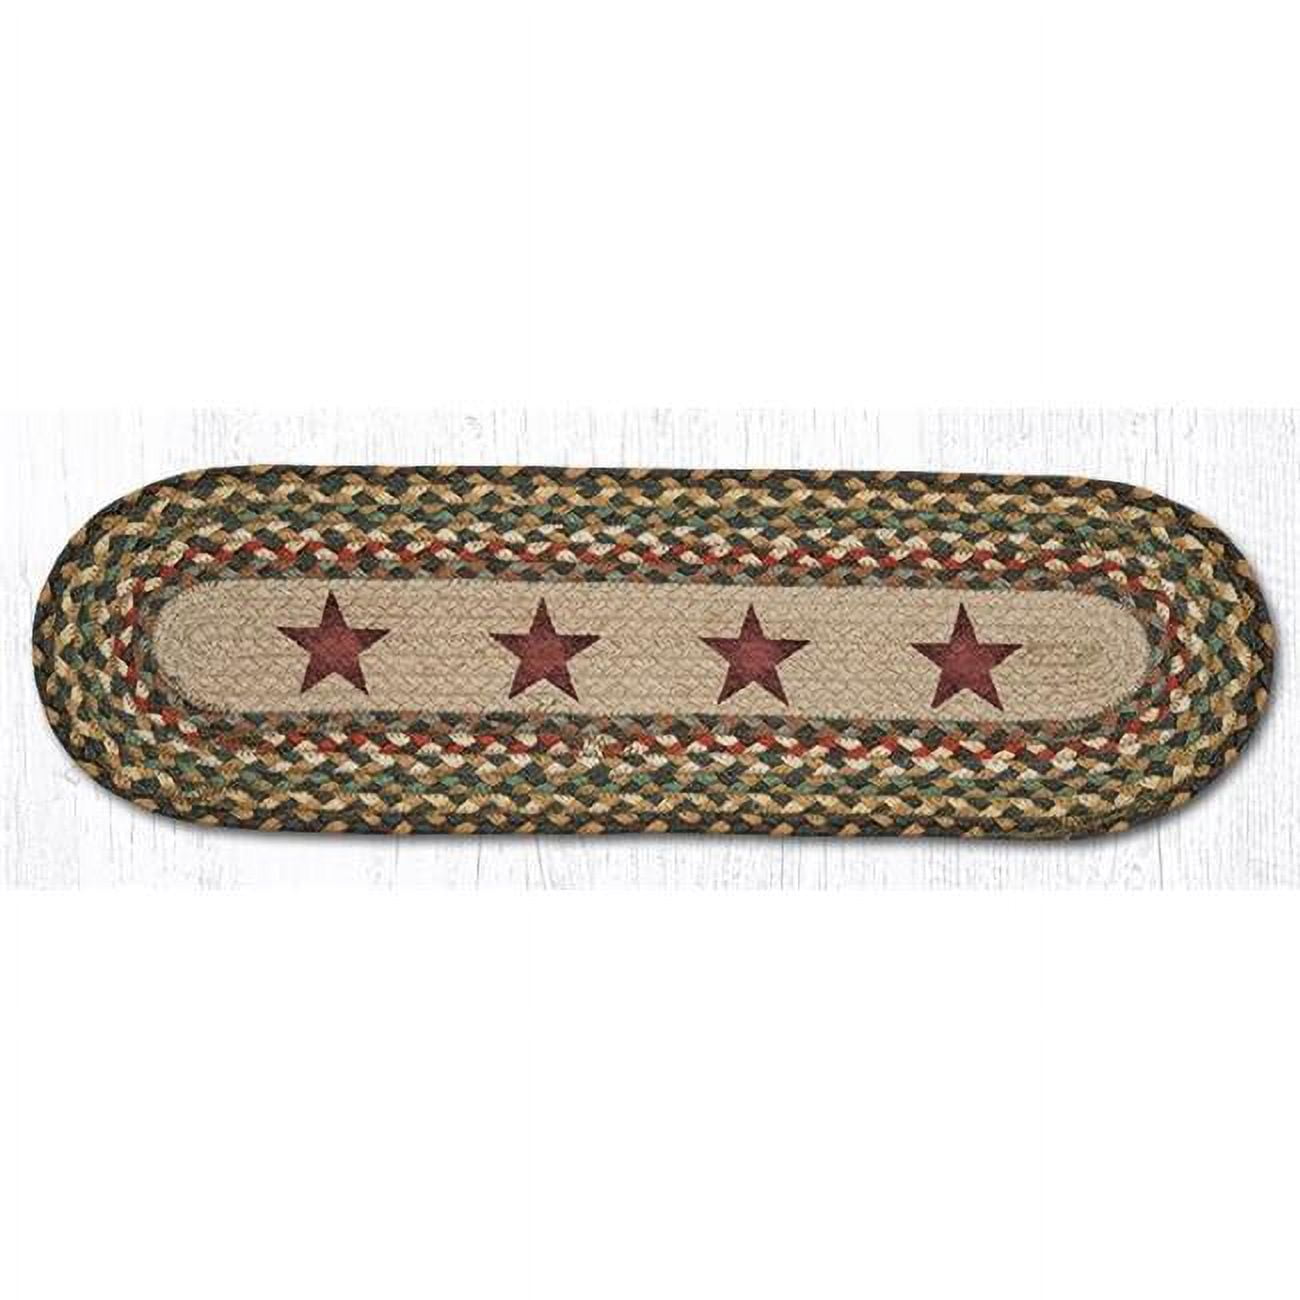 Capitol Importing 49-st051gs 27 X 8.25 In. Gold Stars Printed Oval Stair Tread Rug